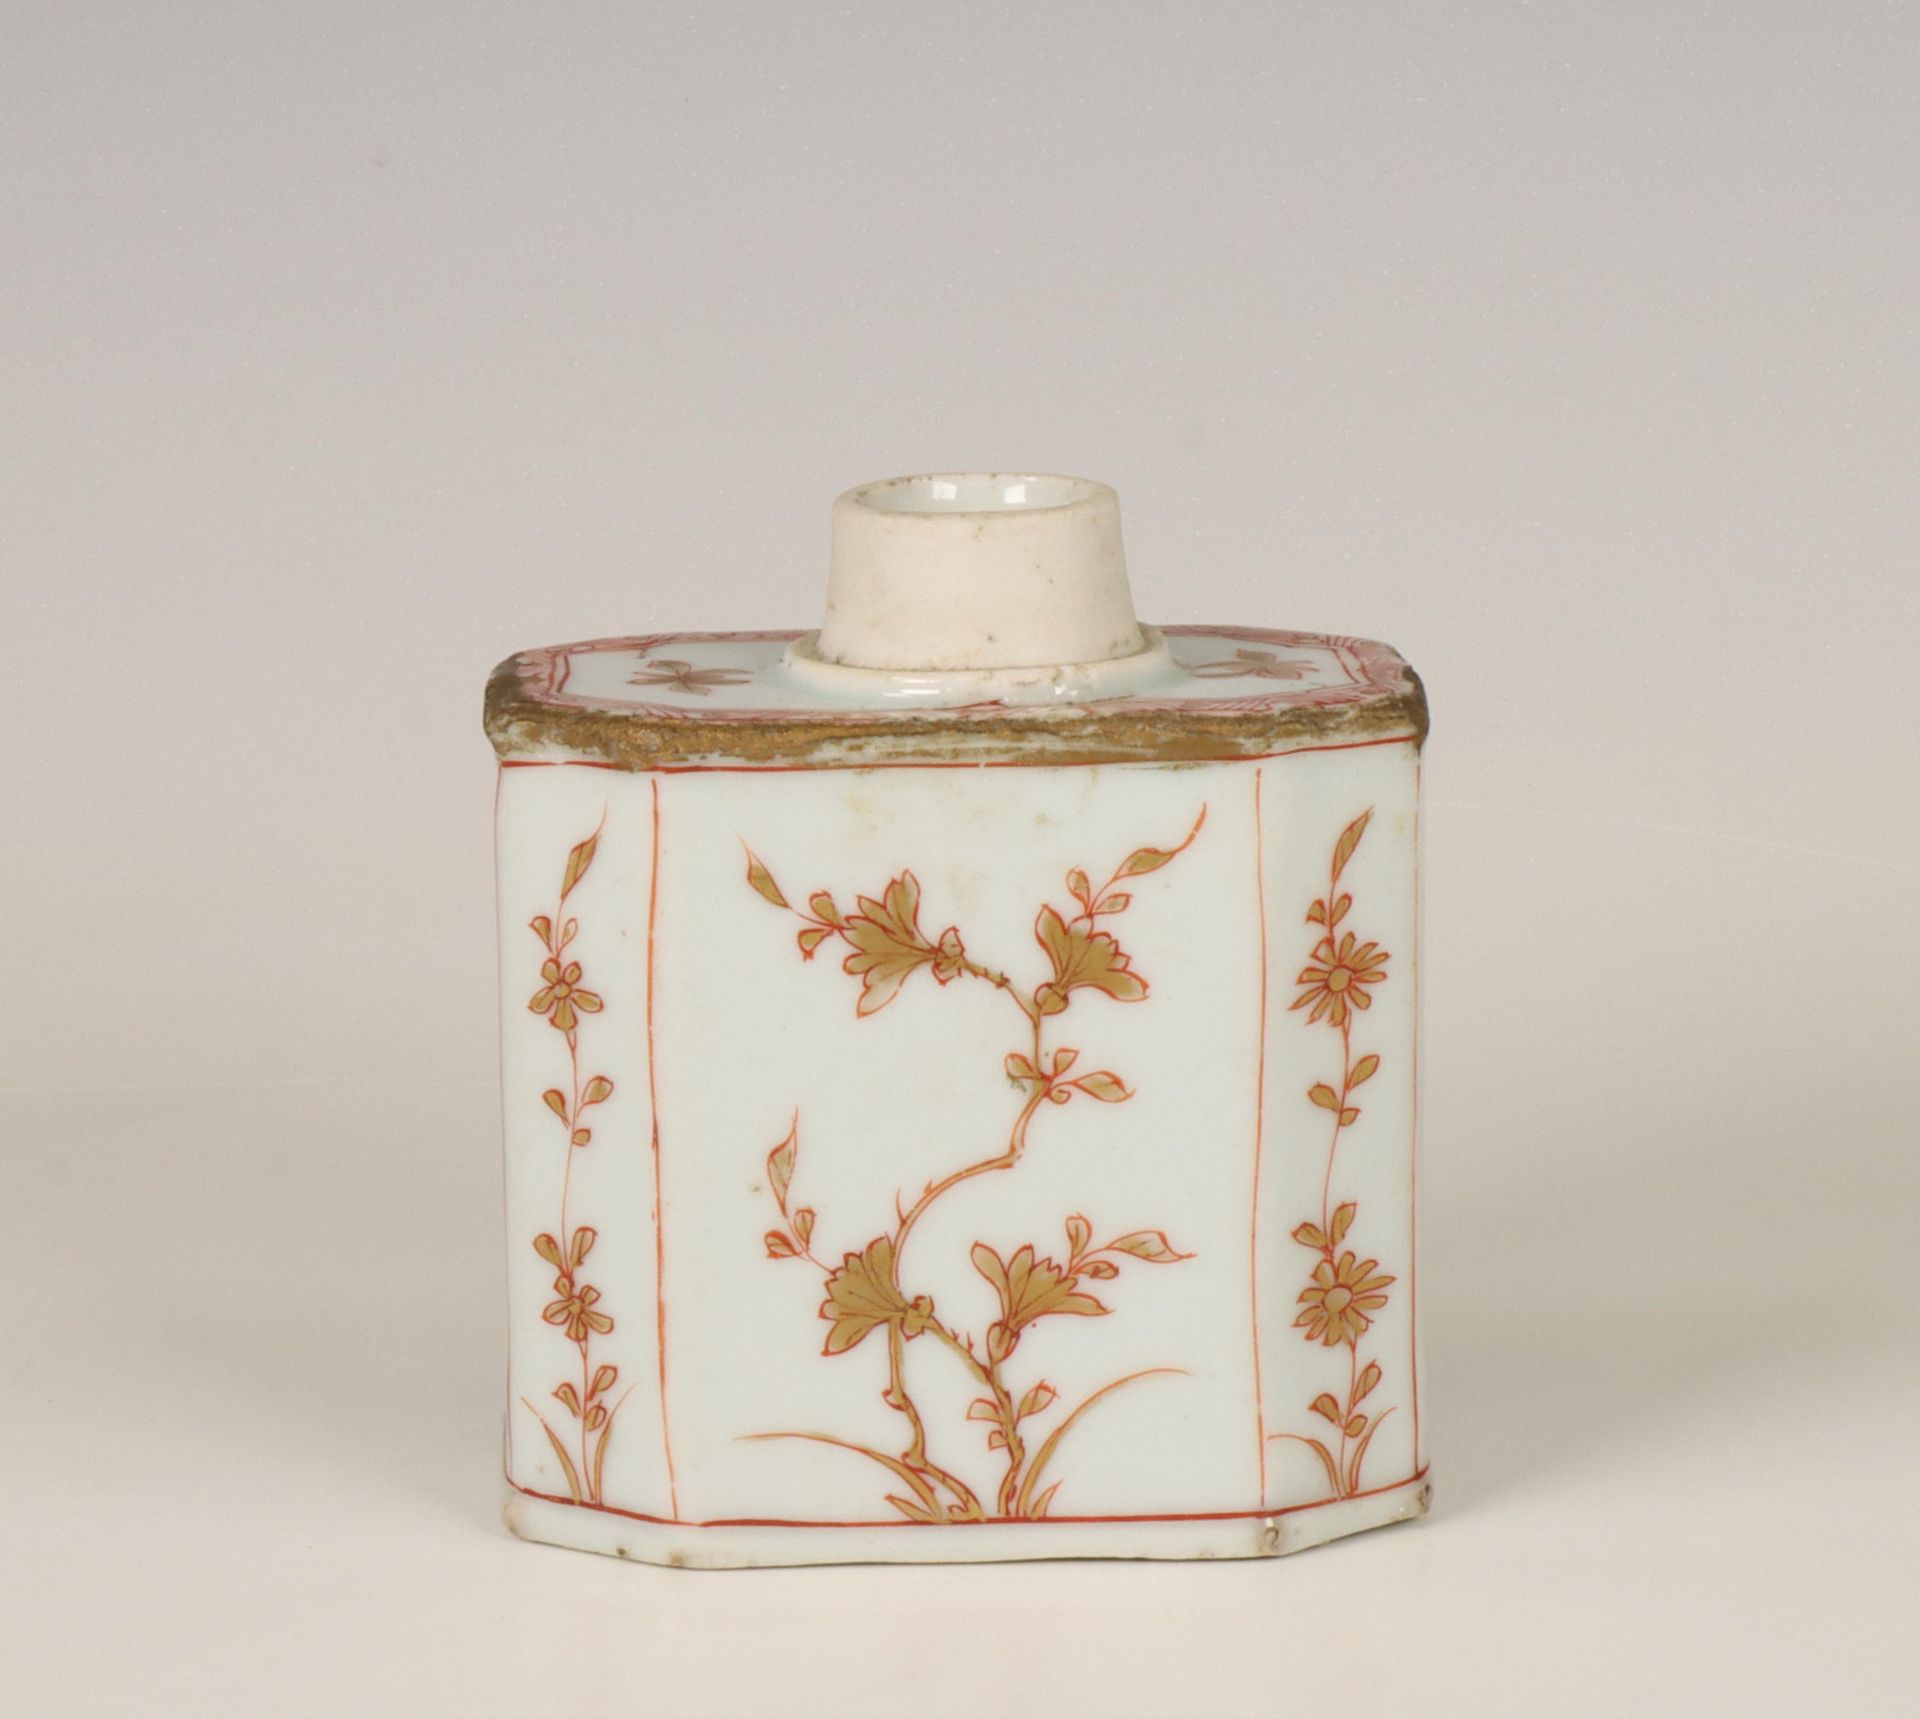 China, an iron-red and gilt porcelain tea-caddy, 18th century,